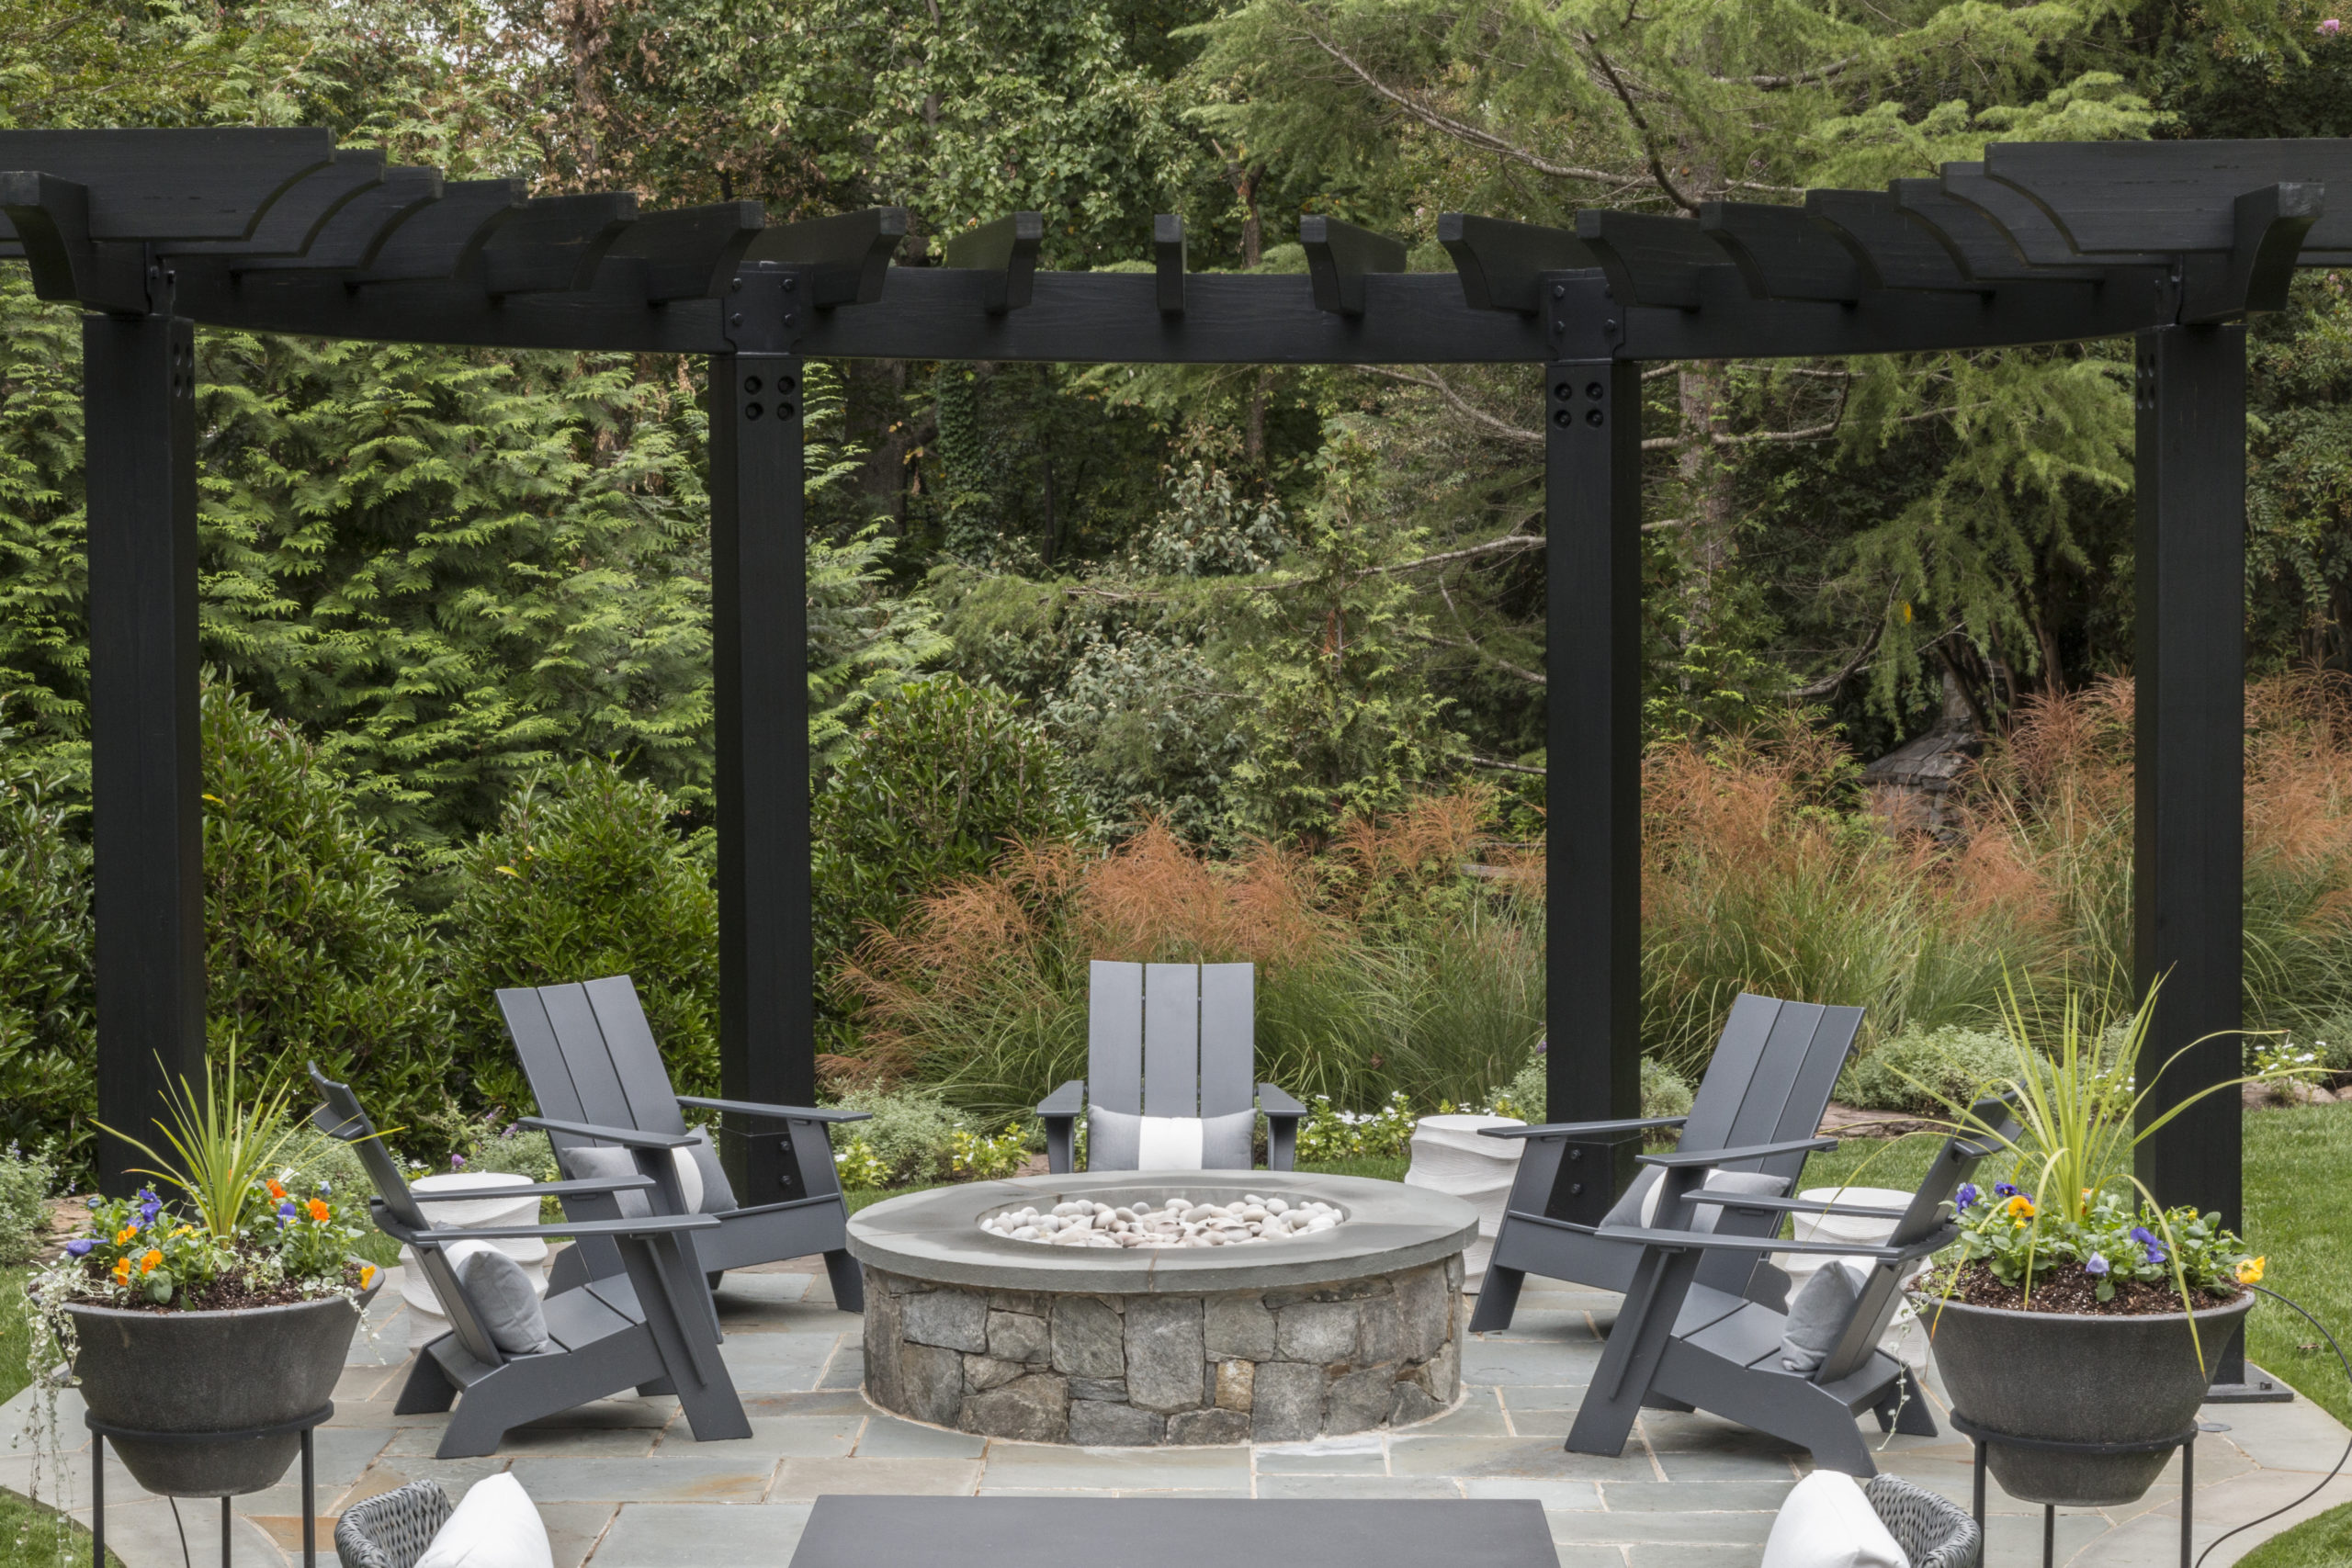 Enjoy the outdoors: a fire pit and chairs on a beautifully landscaped patio, ideal for unwinding.